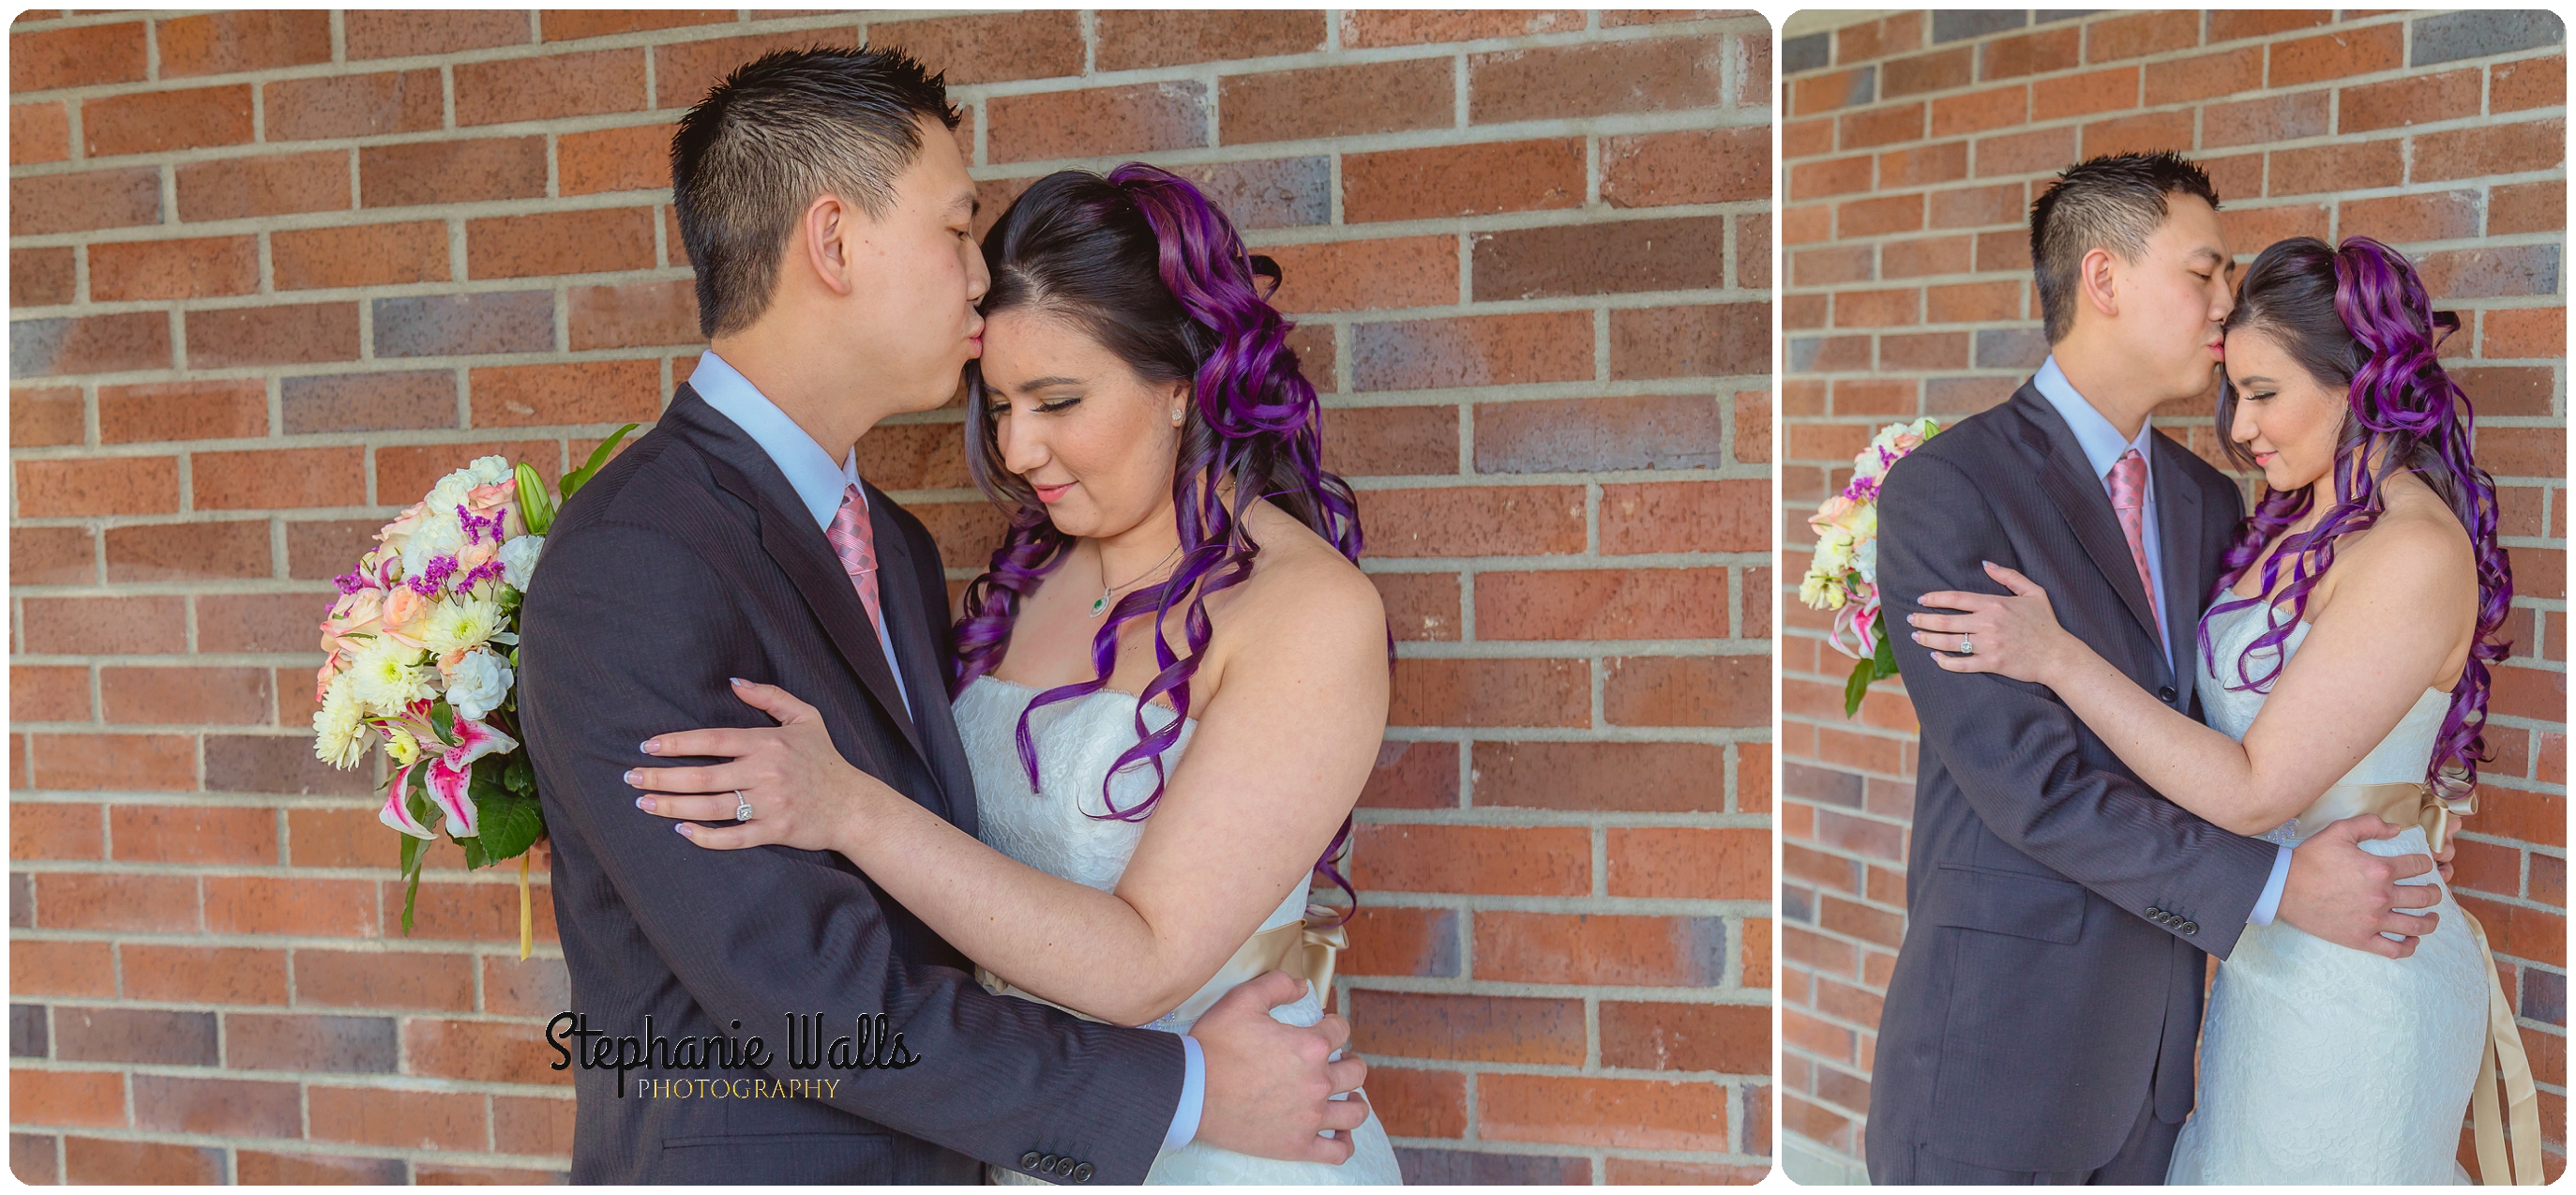 Chan Wedding 003 LAUGHTER AND LACE | BOTHELL COURTHOUSE WEDDING BOTHELL WA